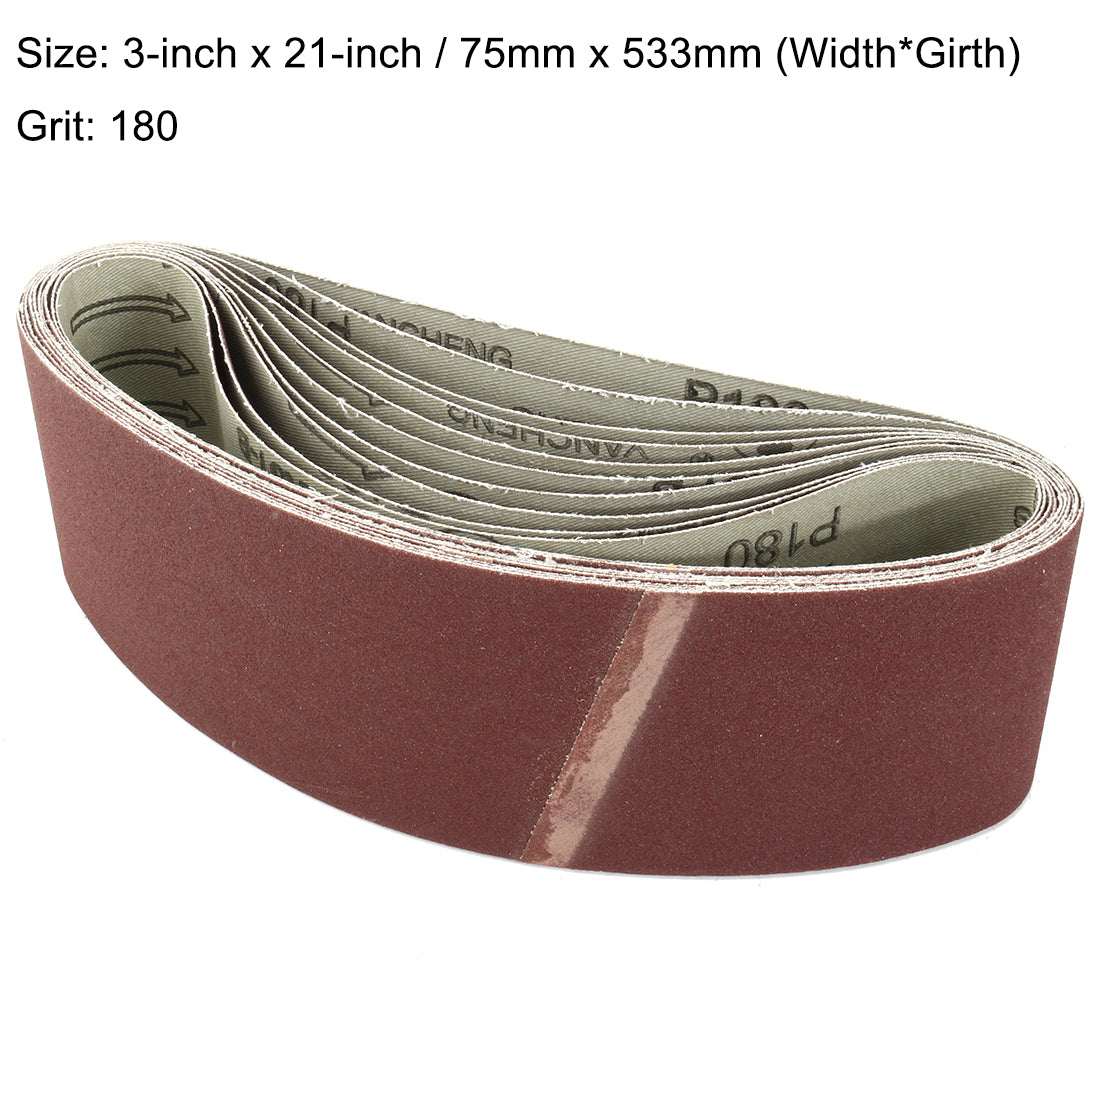 uxcell Uxcell 3-Inch x 21-Inch Aluminum Oxide Sanding Belt 180 Grits Lapped Joint 10pcs